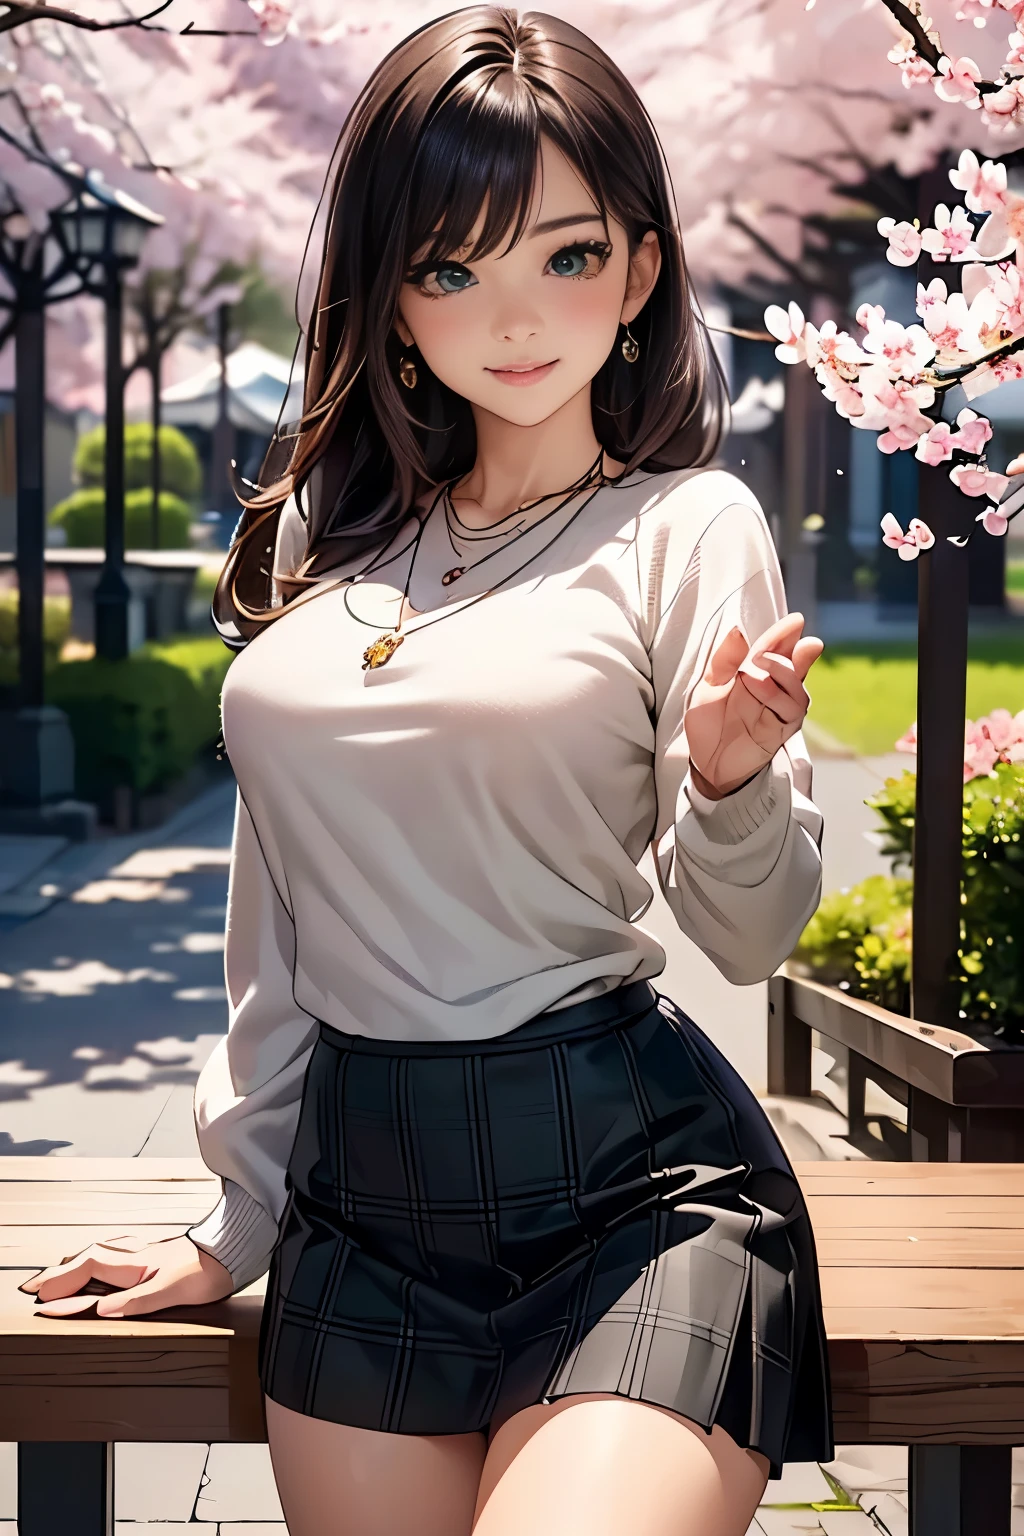 ((table top, highest quality, High resolution, nffsw, perfect pixel, written boundary depth, 4K, nffsw, nffsw))), 1 girl, single, alone, beautiful anime girl, beautiful art style, anime character, ((long hair, bangs, brown hair)), ((green eyes:1.4, round eyes, beautiful eyelashes, realistic eyes)), ((detailed face, blush:1.2)), ((smooth texture:0.75, realistic texture:0.65, realistic:1.1, Anime CG style)),  dynamic angle,  ((throw, Selfie Pose, portrait)), ((Black sweater, long sleeve, black skirt, plaid skirt, Fashionable, 1 diamond necklace)), smile,  amusement park, ((cherry blossoms, cherry blossomsの花が散る))